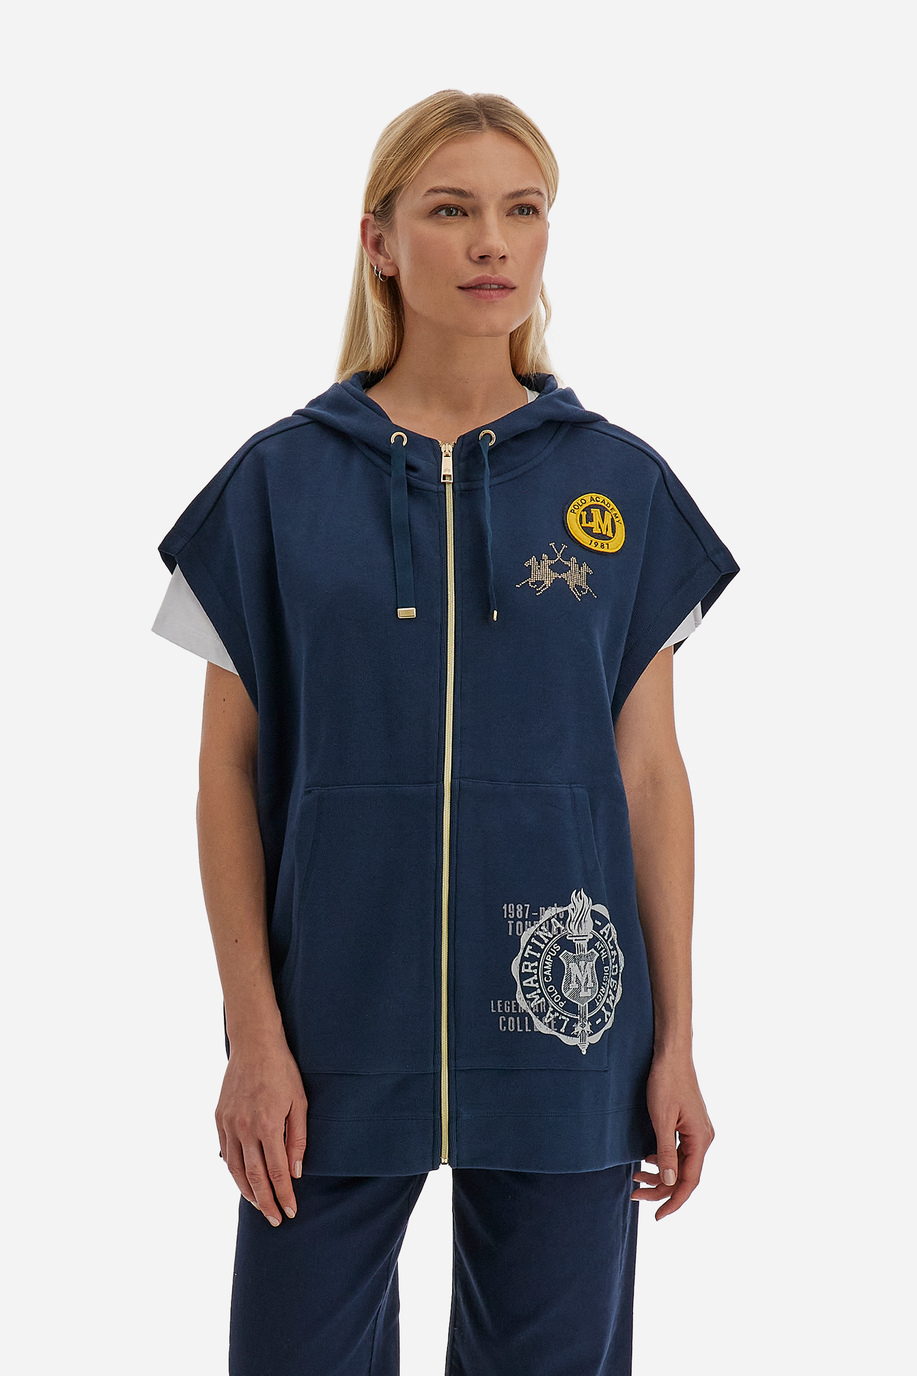 Women's sleeveless full-zip sweatshirt in solid color Polo Academy - Vondra - Our favourites for her | La Martina - Official Online Shop